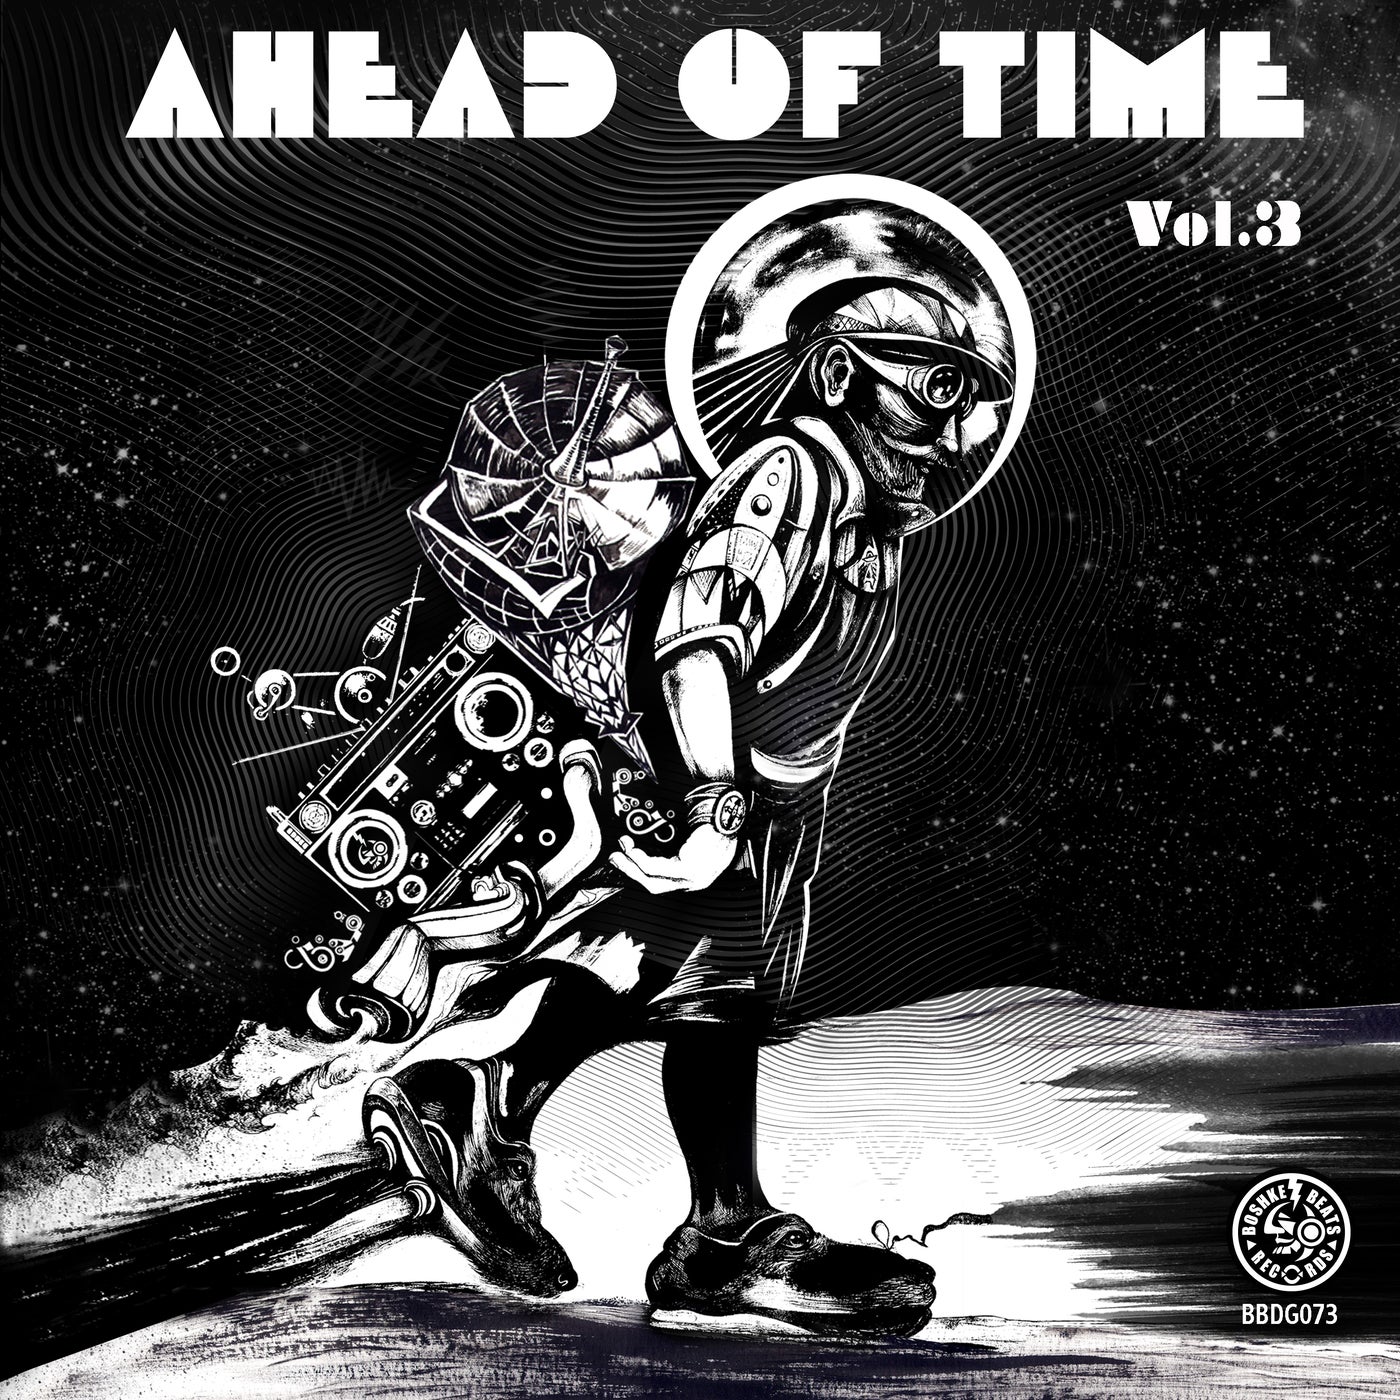 Ahead Of Time Vol.3